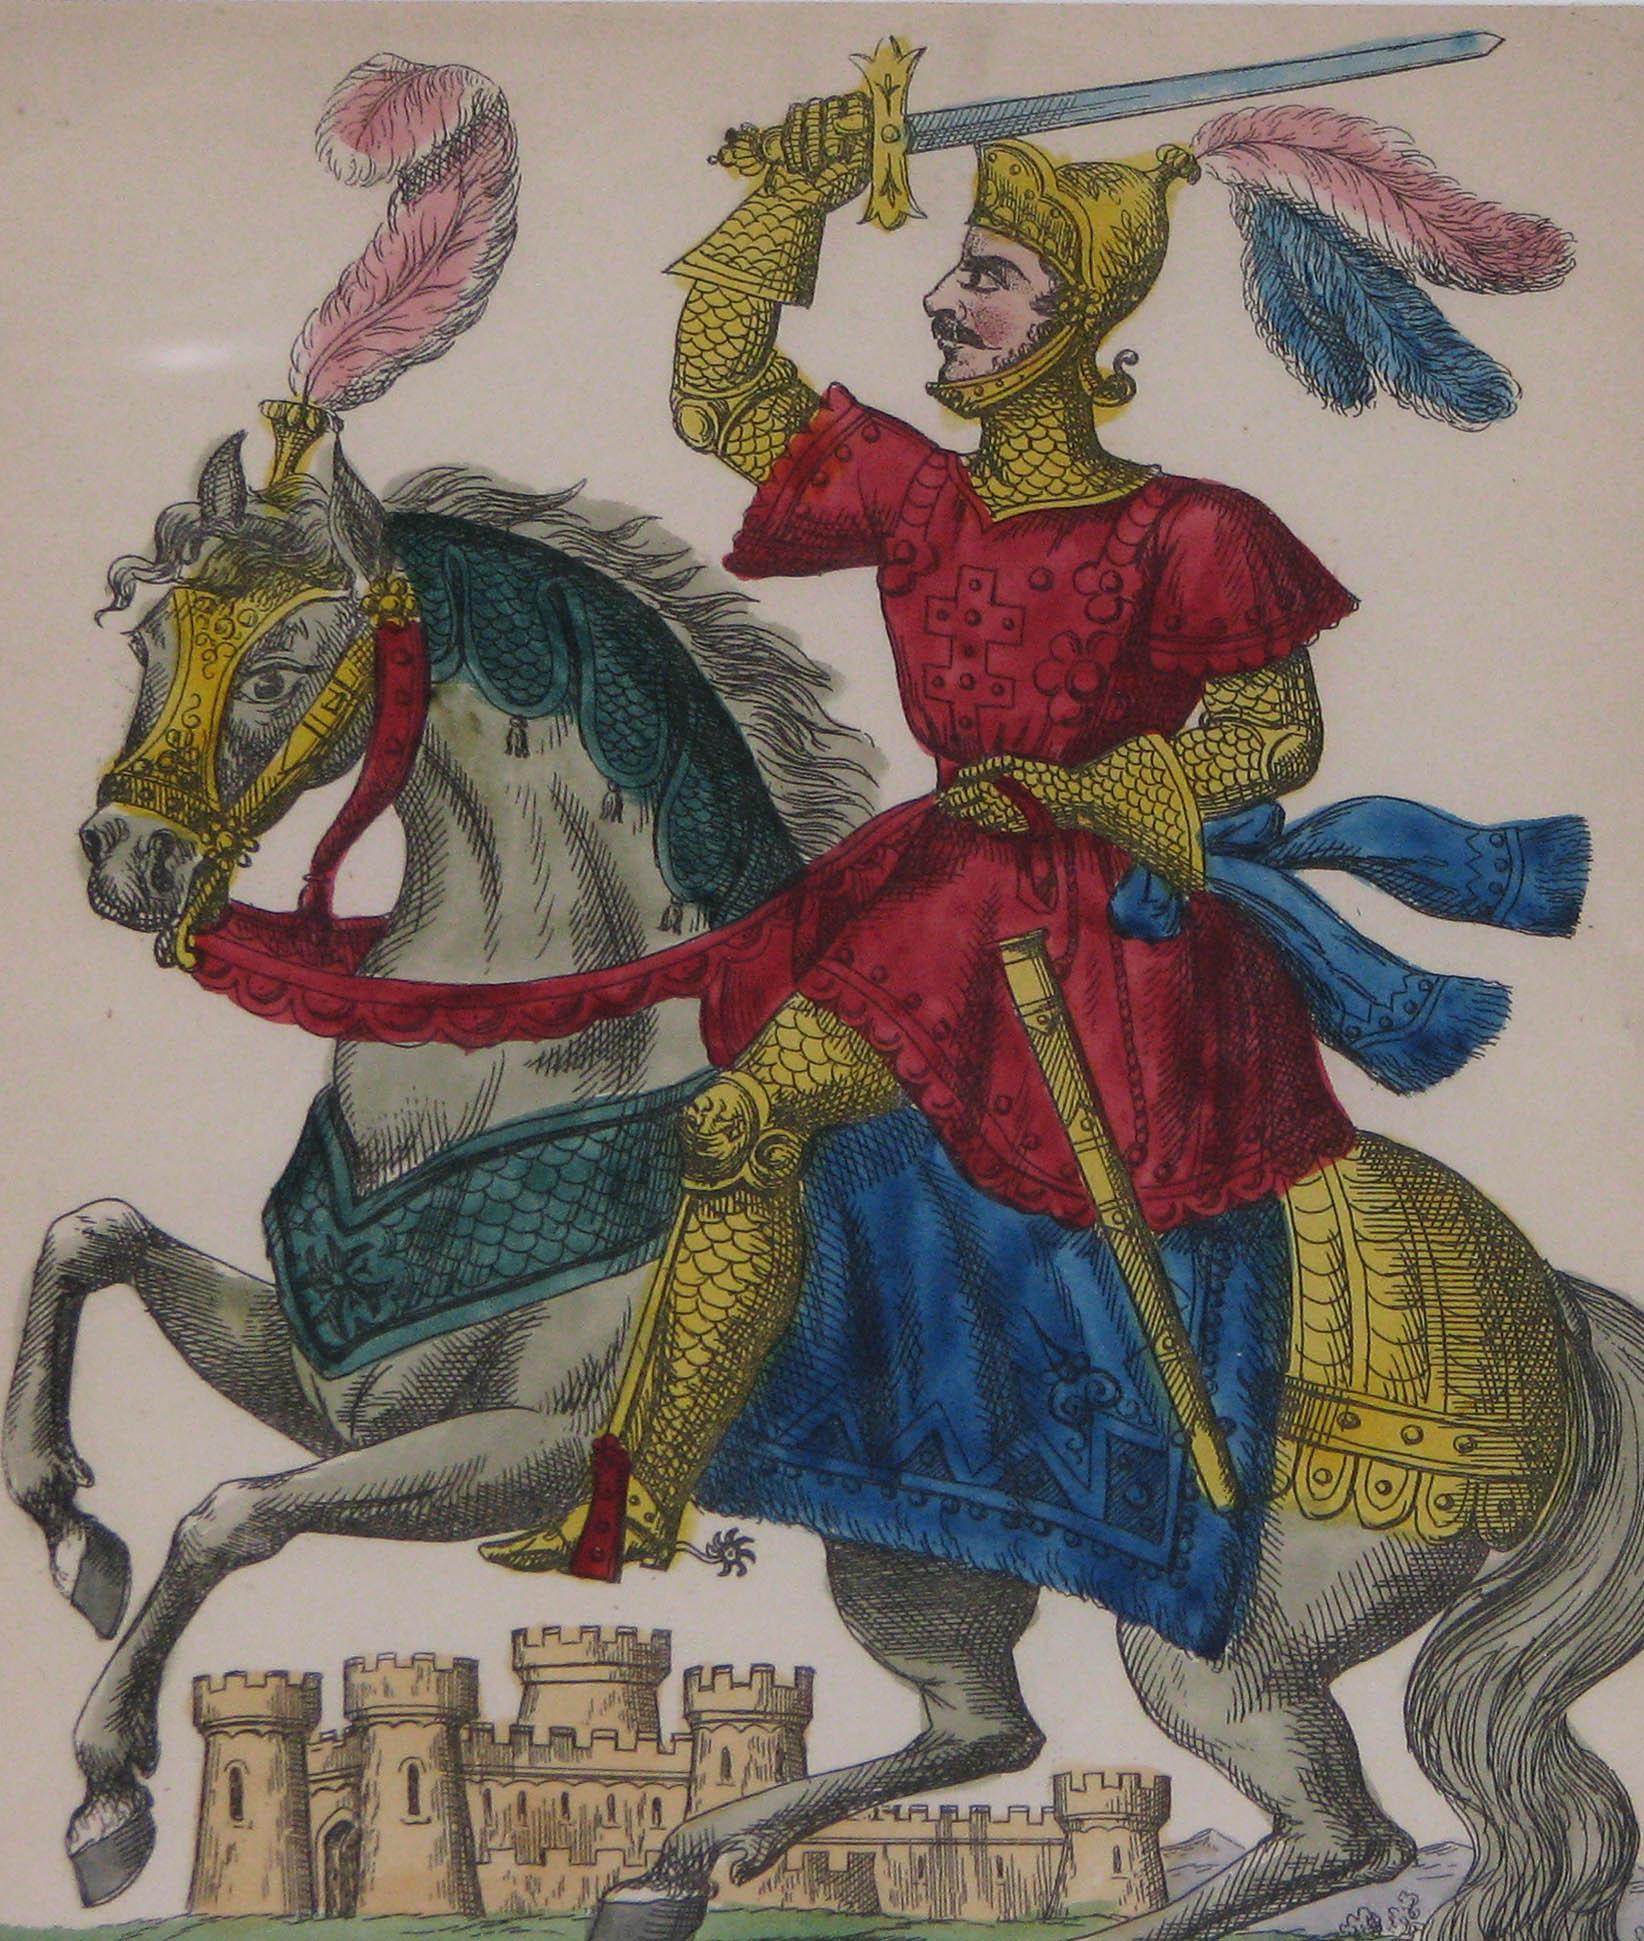 'Sir Brian', an original 19th century copper plate theatrical print with vivid original hand color published by John Redington at his Theatrical Print Warehouse in Hoxton Old Town, London, in 1852. 'Sir Brian' is depicted as a medieval knight seated